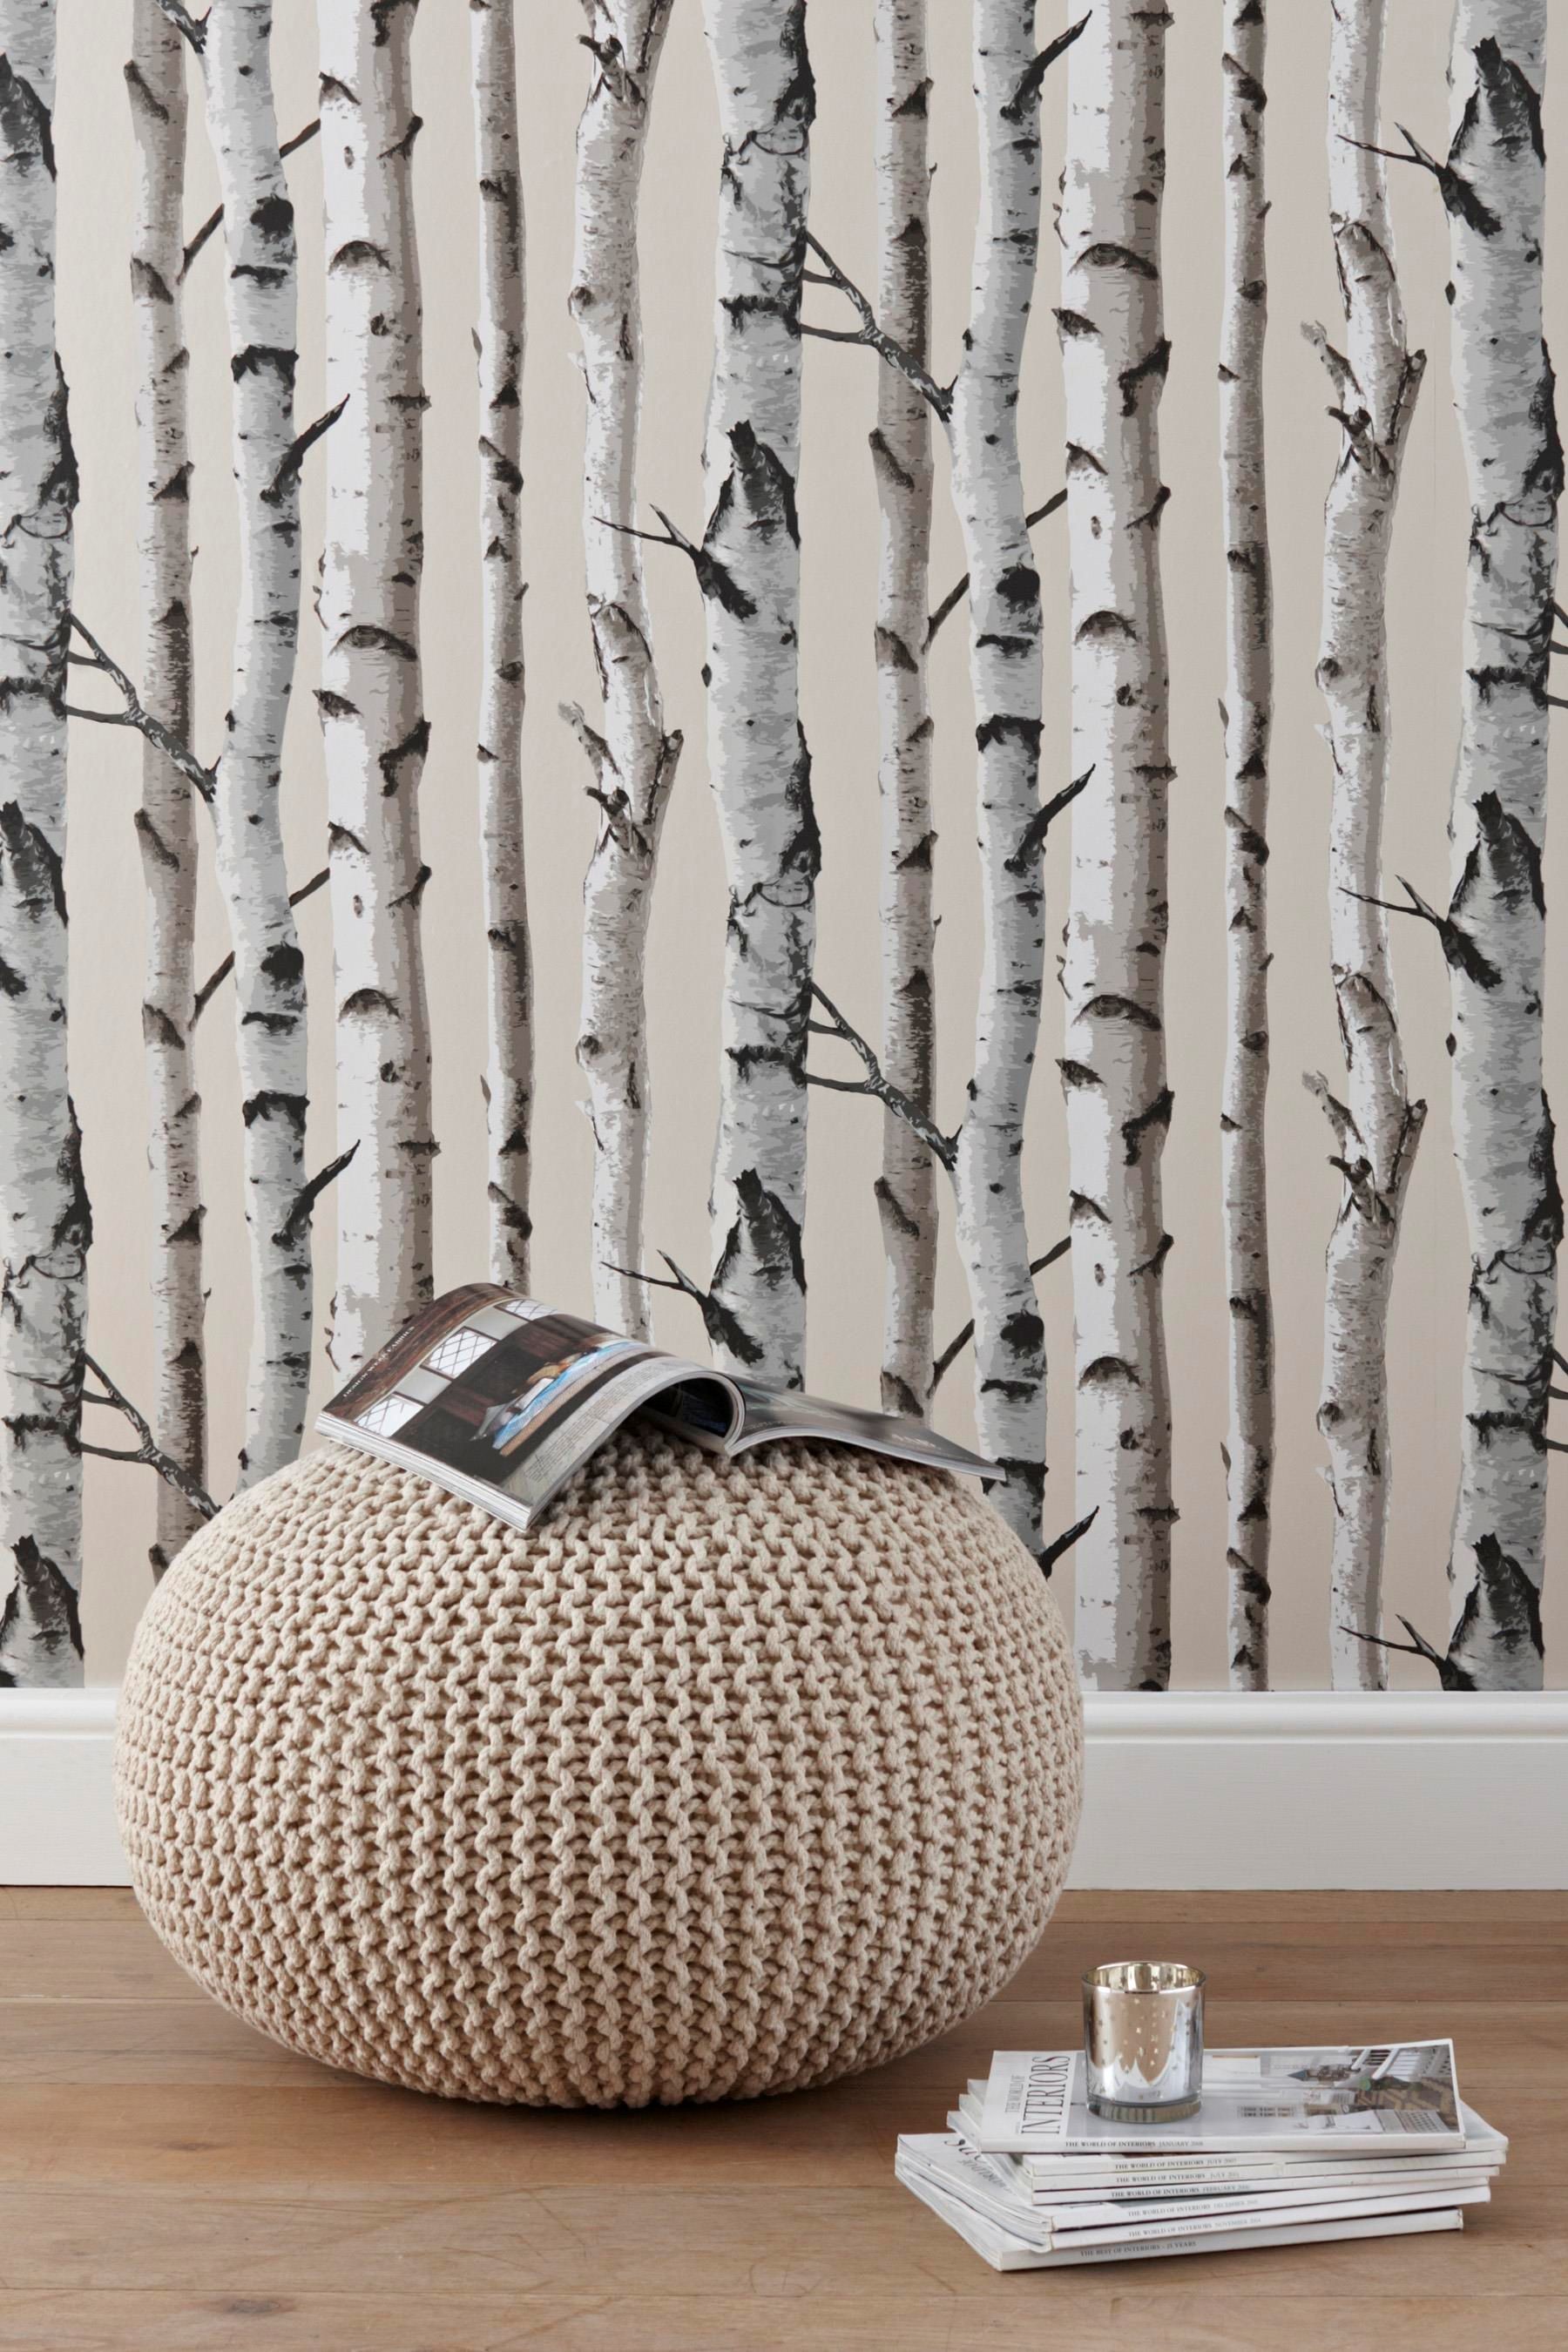 1800x2700 Birch trees wallpaper- would like this for the chimney breast.